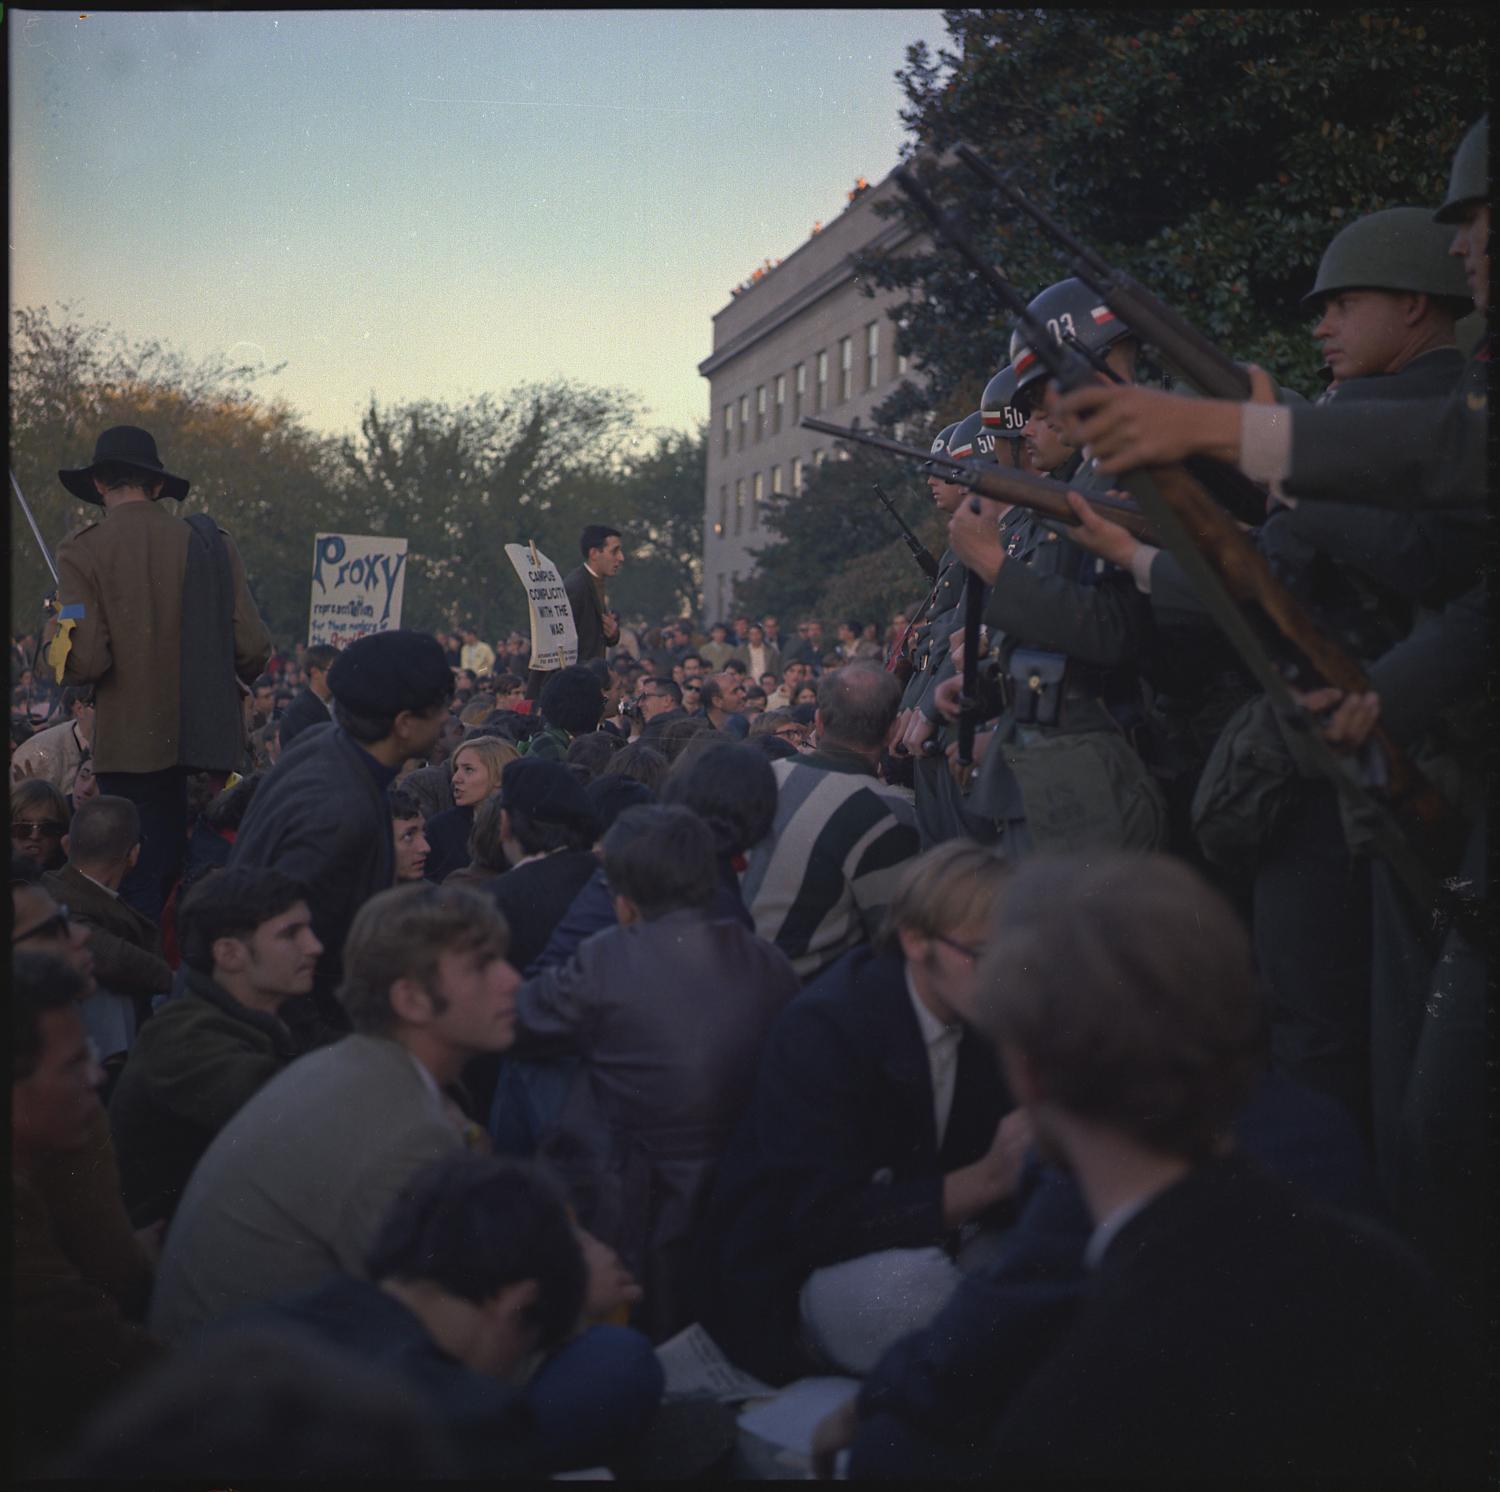 Members of the military police keep back protesters during their sit-in at the Mall Entrance to the Pentagon.